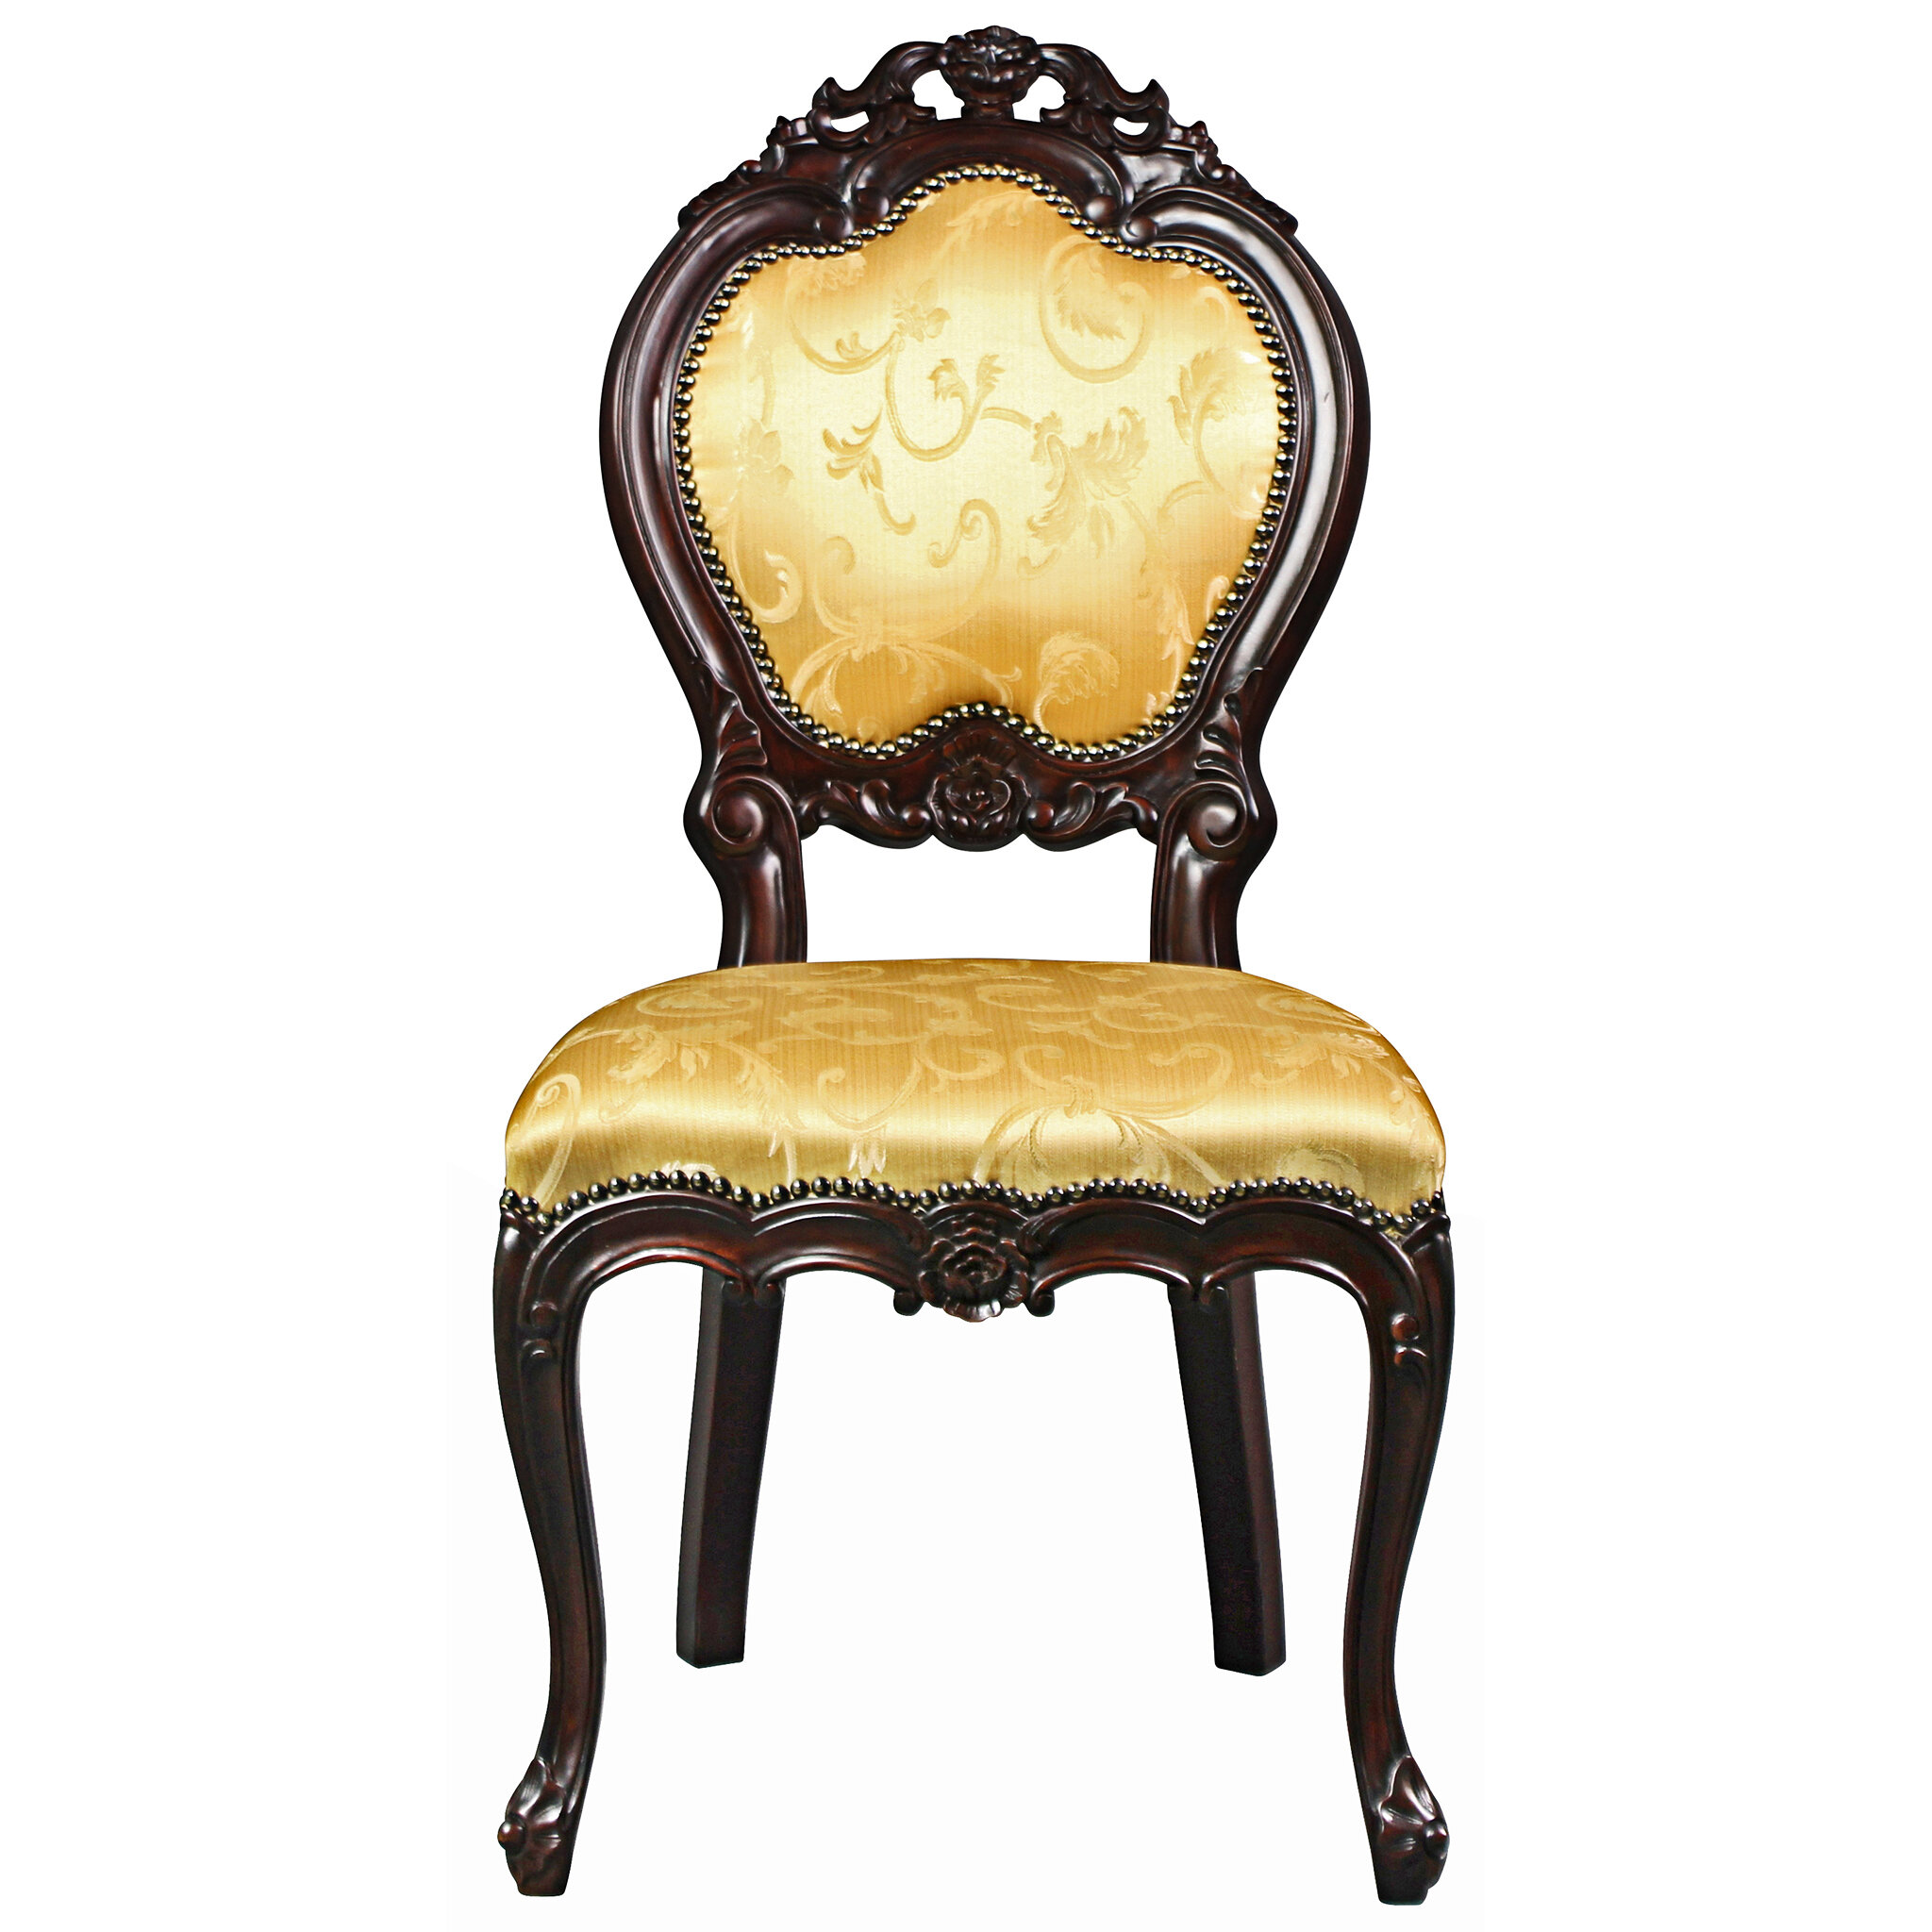  Design Toscano Toulon French Rococo Chairs (Set Includes: 4  Side Chairs & 2 Armchairs) : Home & Kitchen